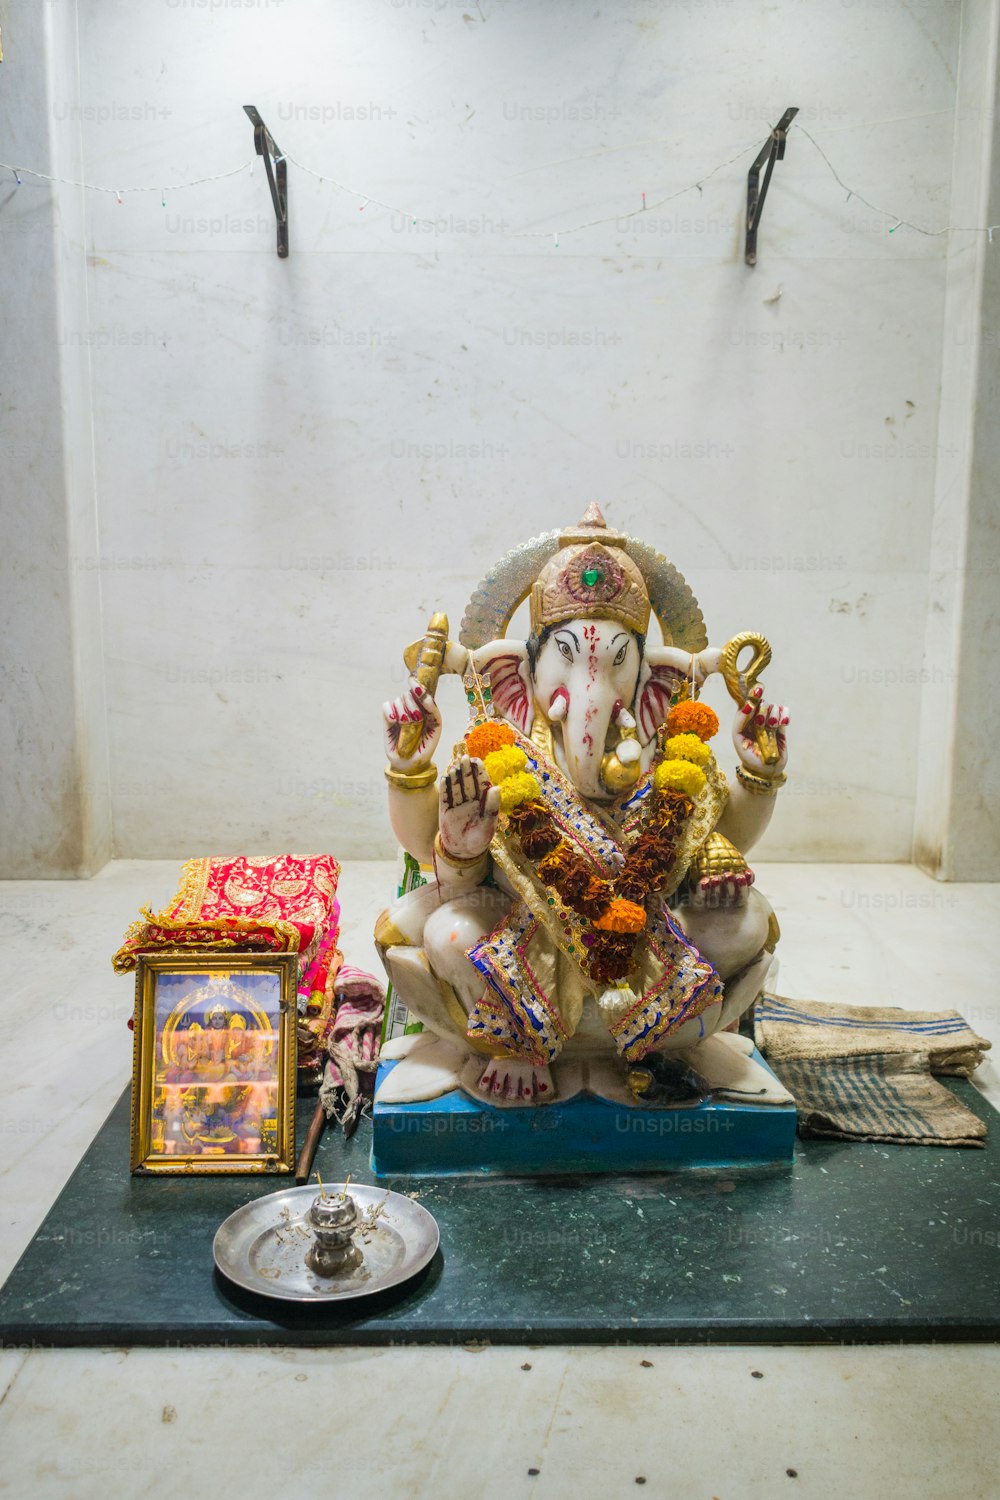 a statue of an elephant sitting on top of a table